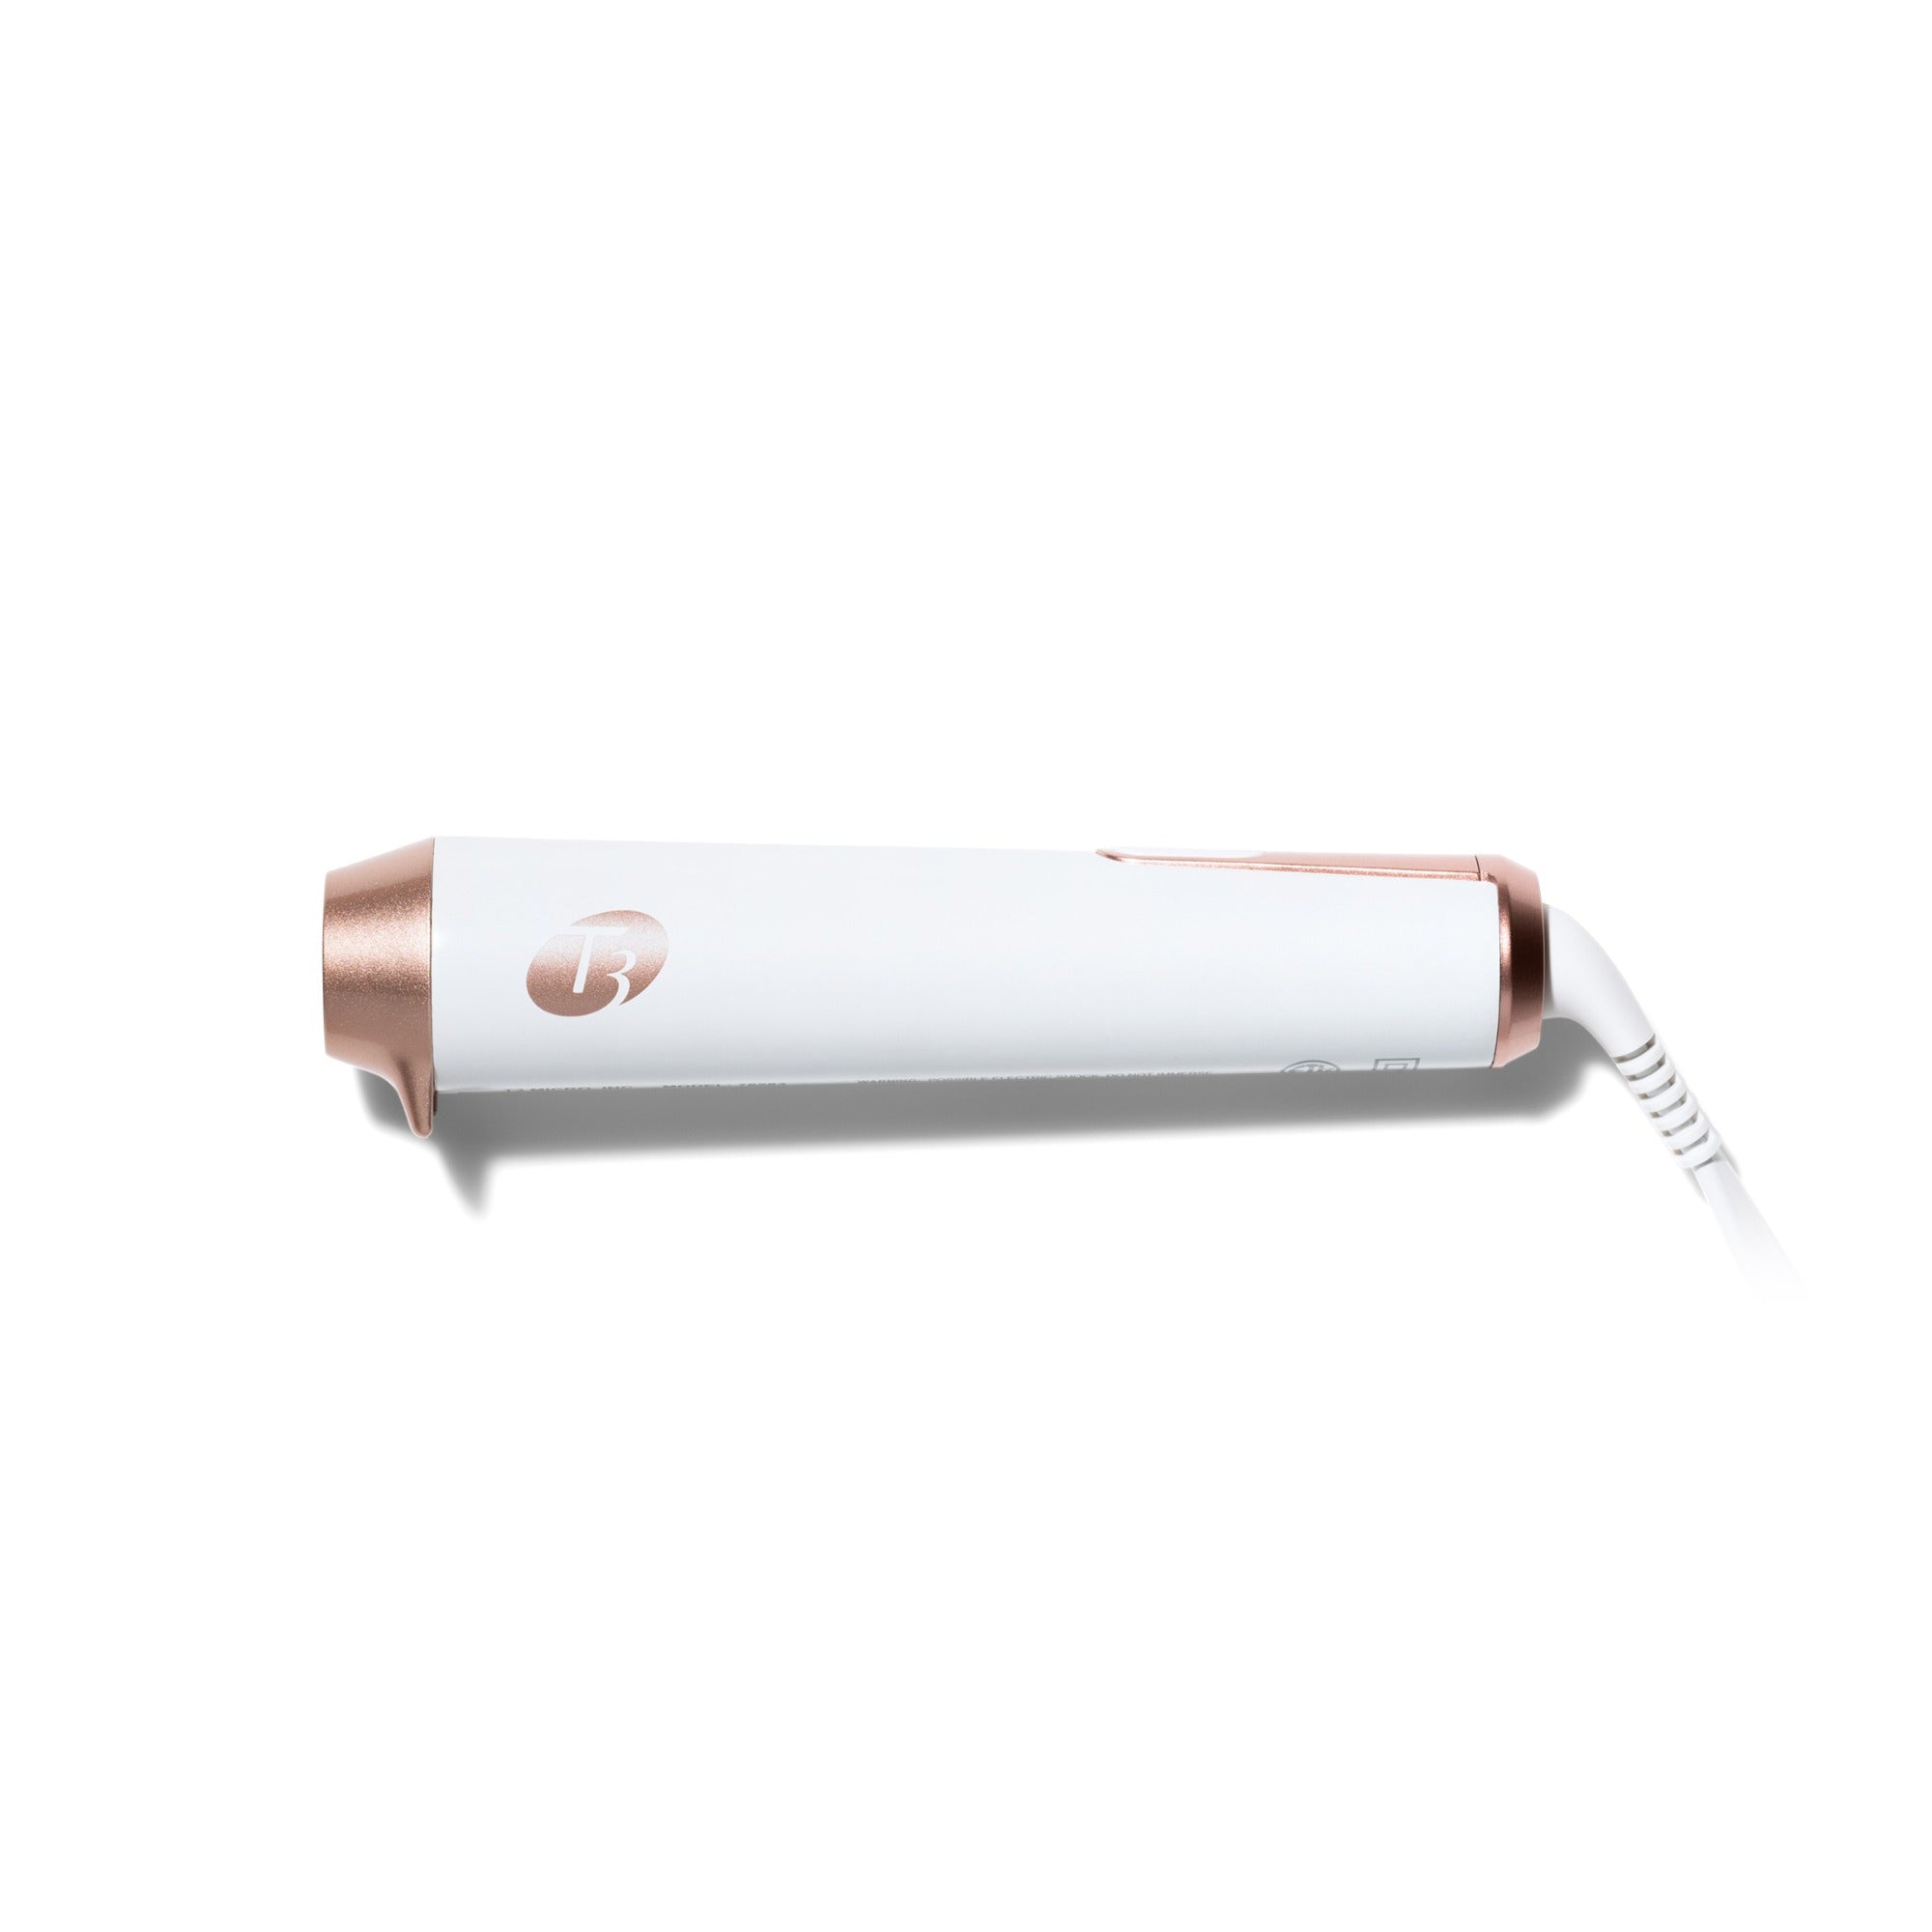 Side view of the T3 Convertible Base Curling Iron